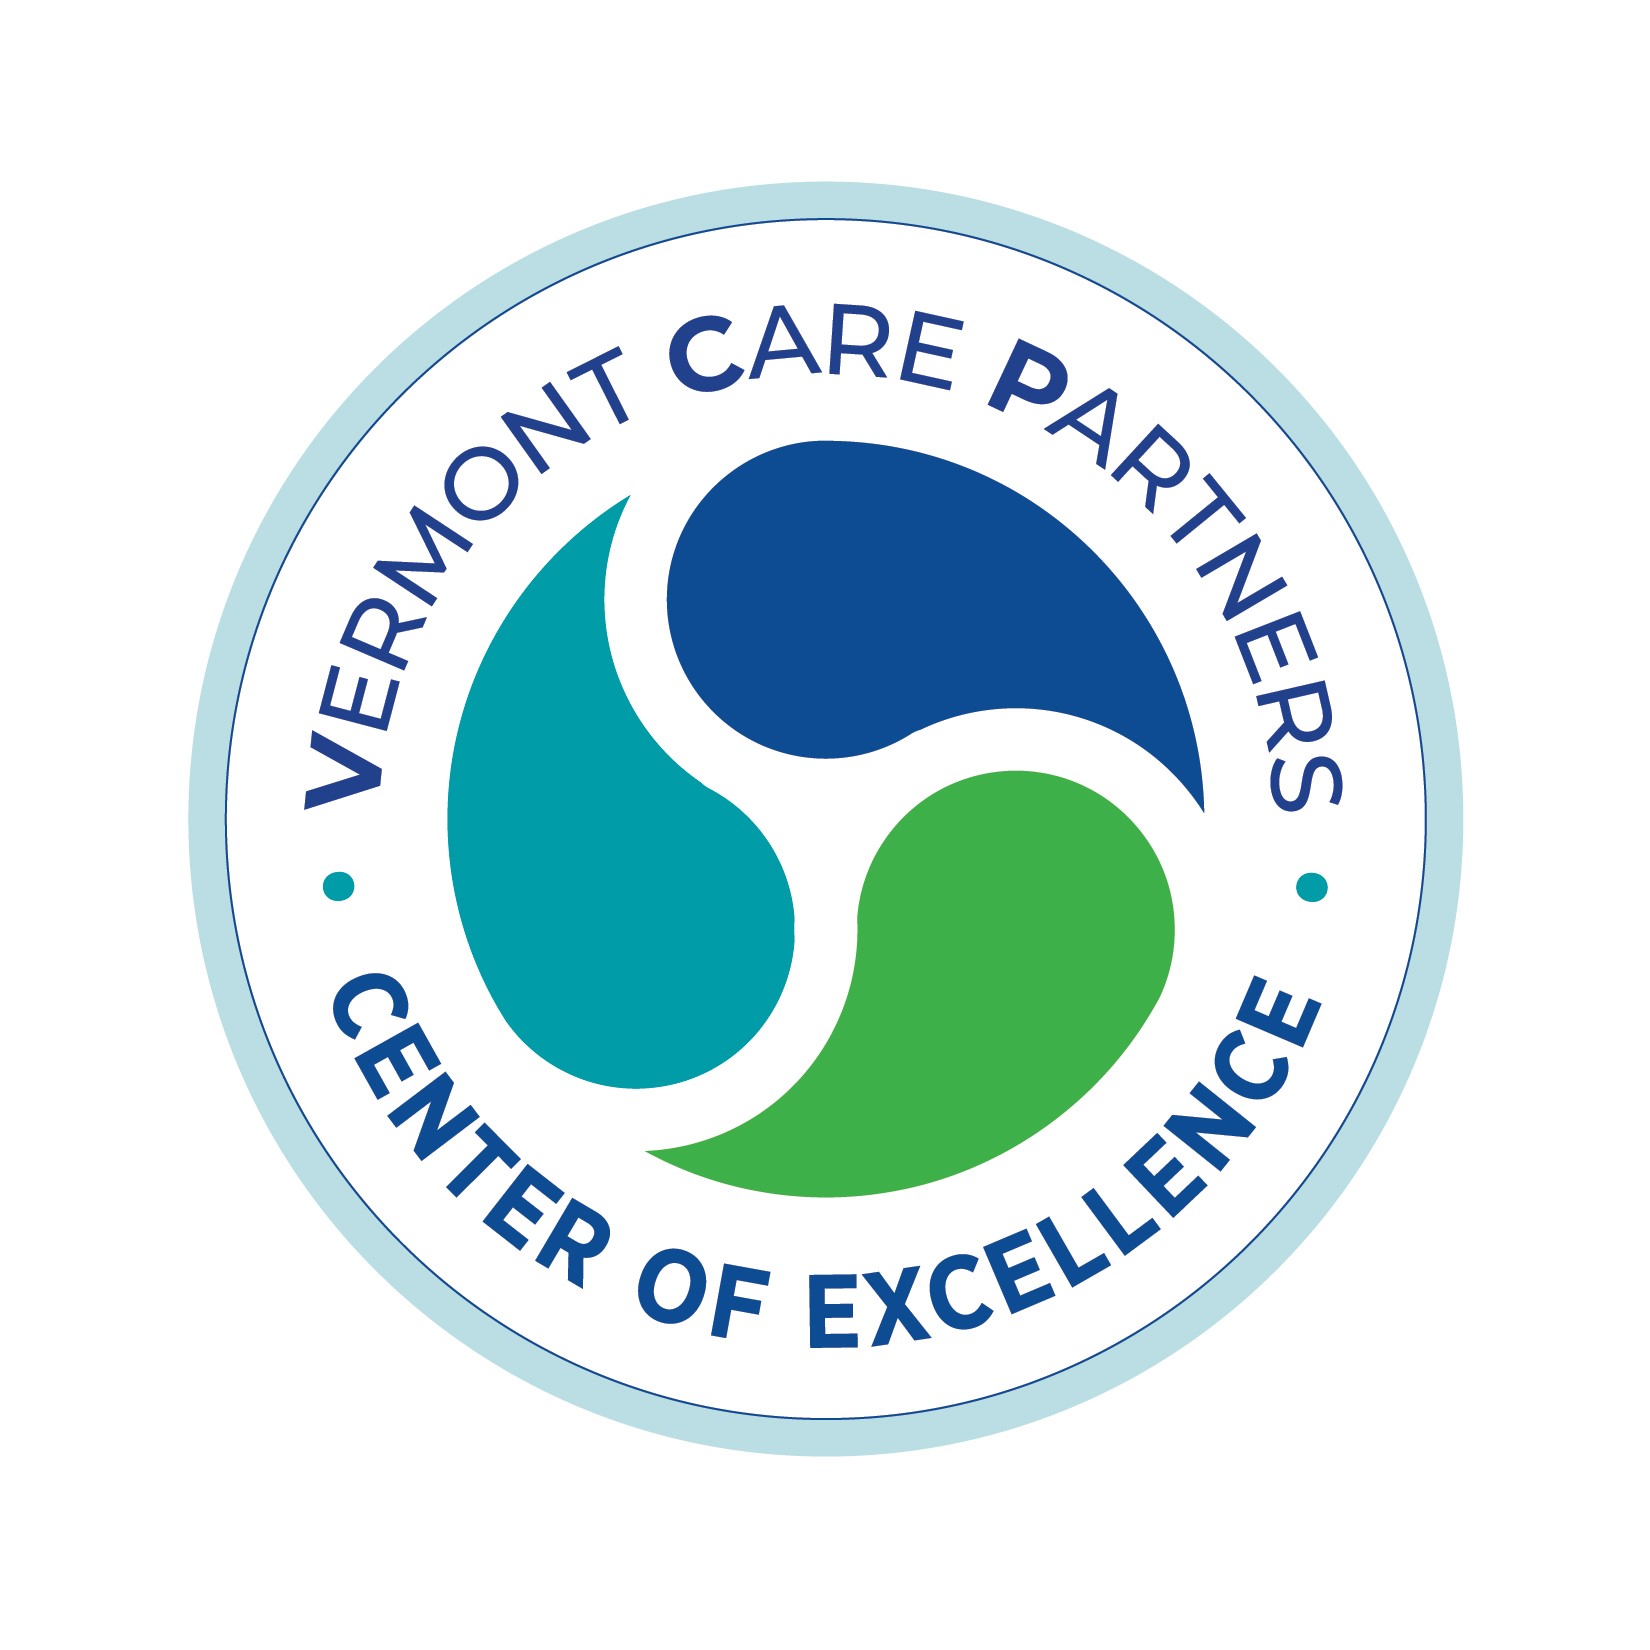 United Counseling Service Again Recognized as a Center of Excellence